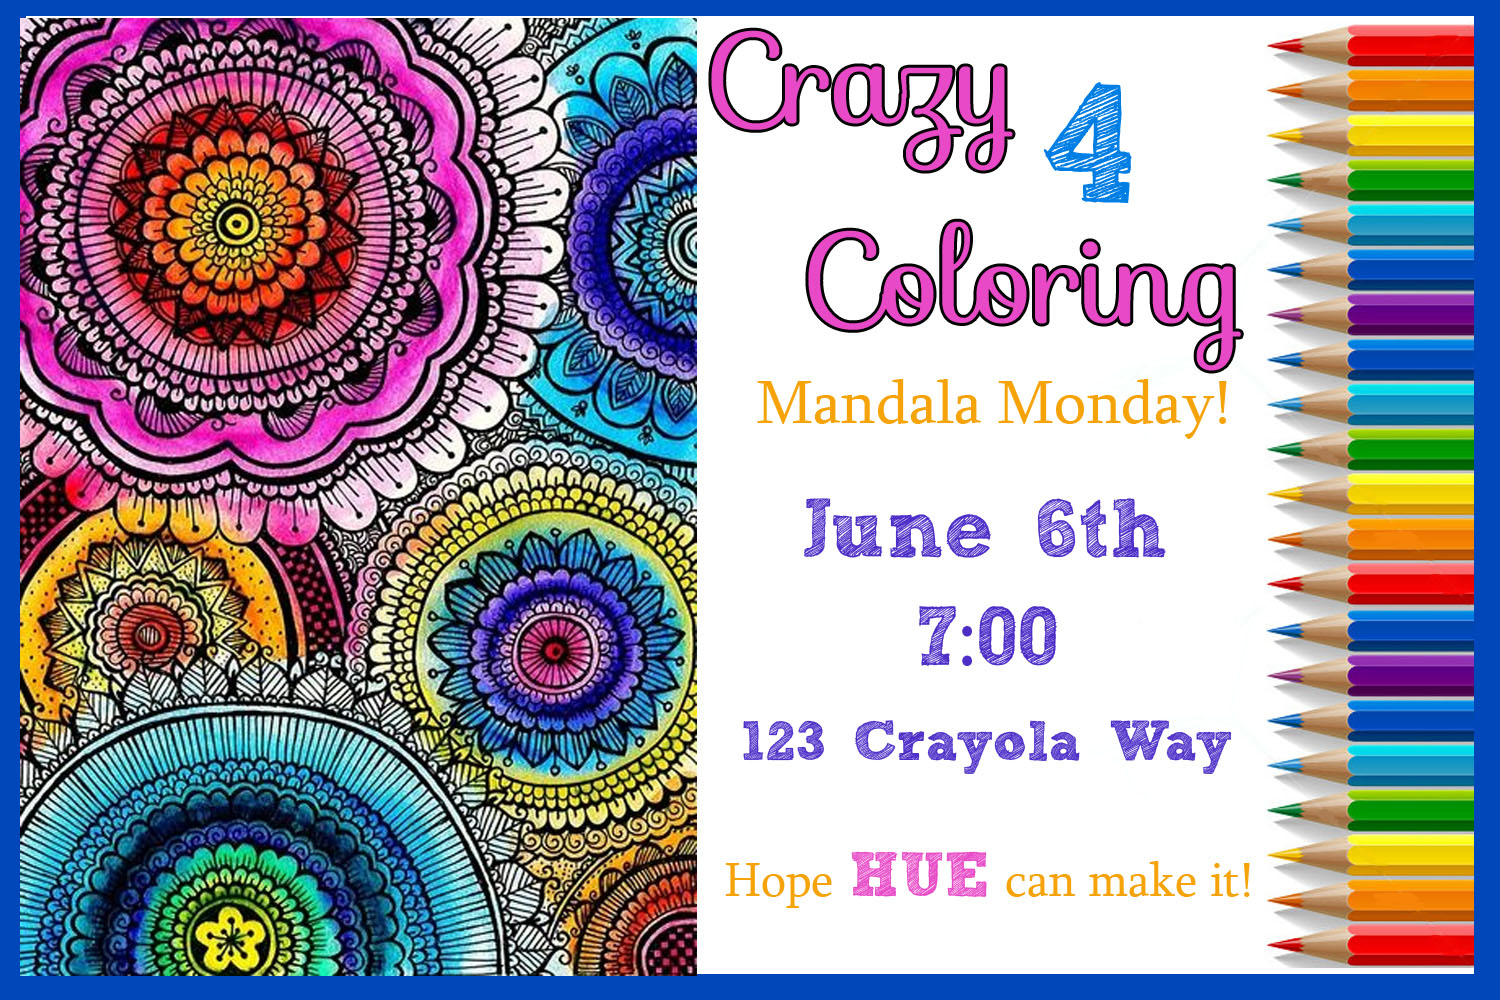 Invite and Delight: Crazy for Coloring - for Adults!